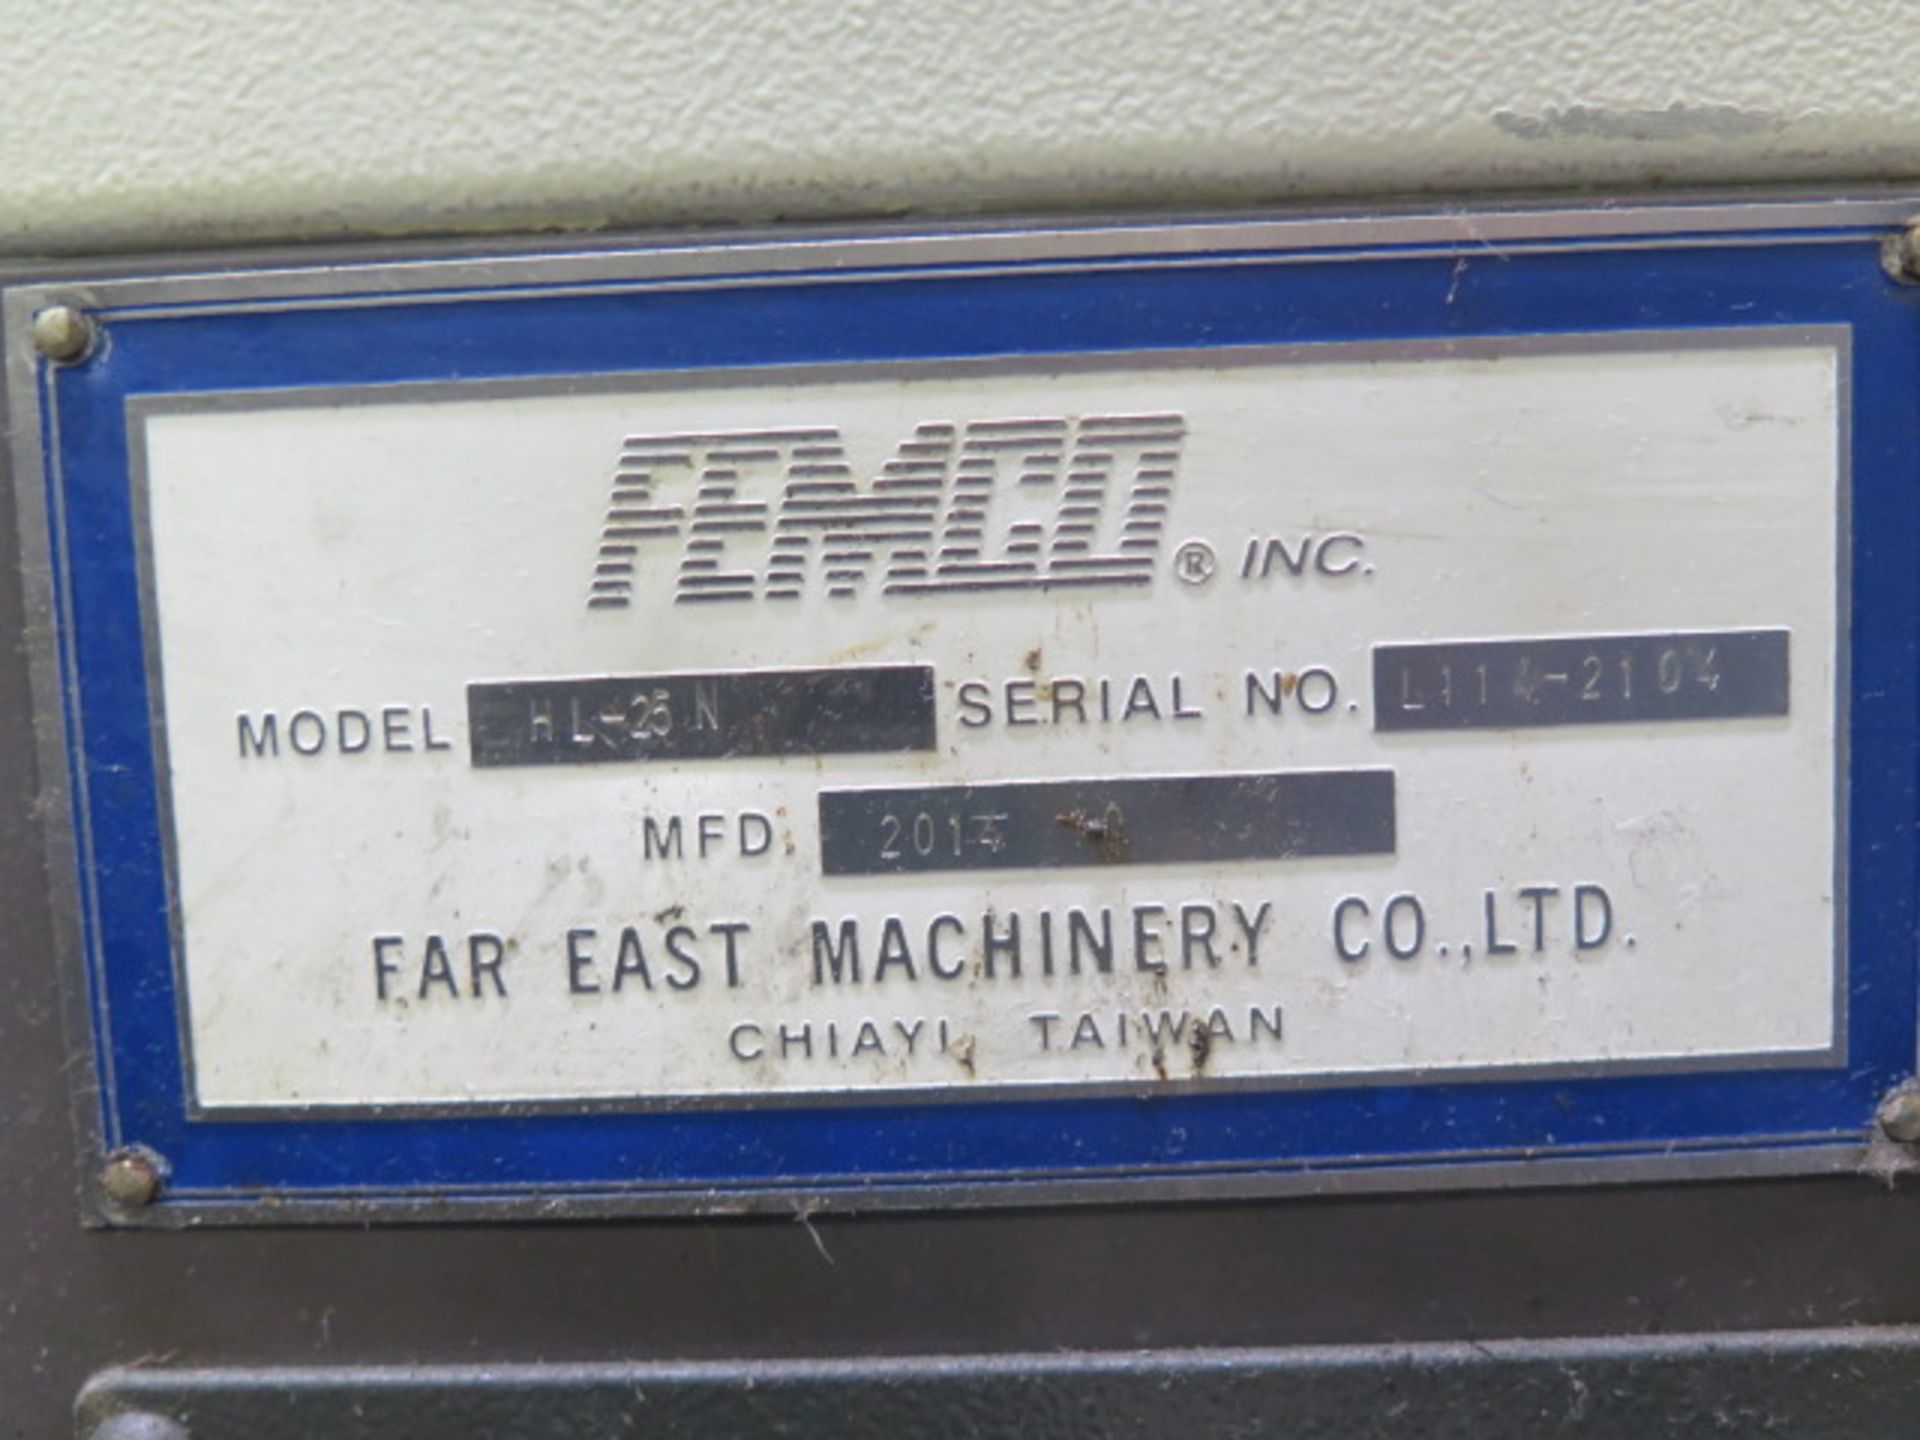 2014 Femco HL-25N CNC Lathe r s/n L114-2104 w/ Fanuc 0i-TD Controls, Tool Presetter, SOLD AS IS - Image 14 of 14